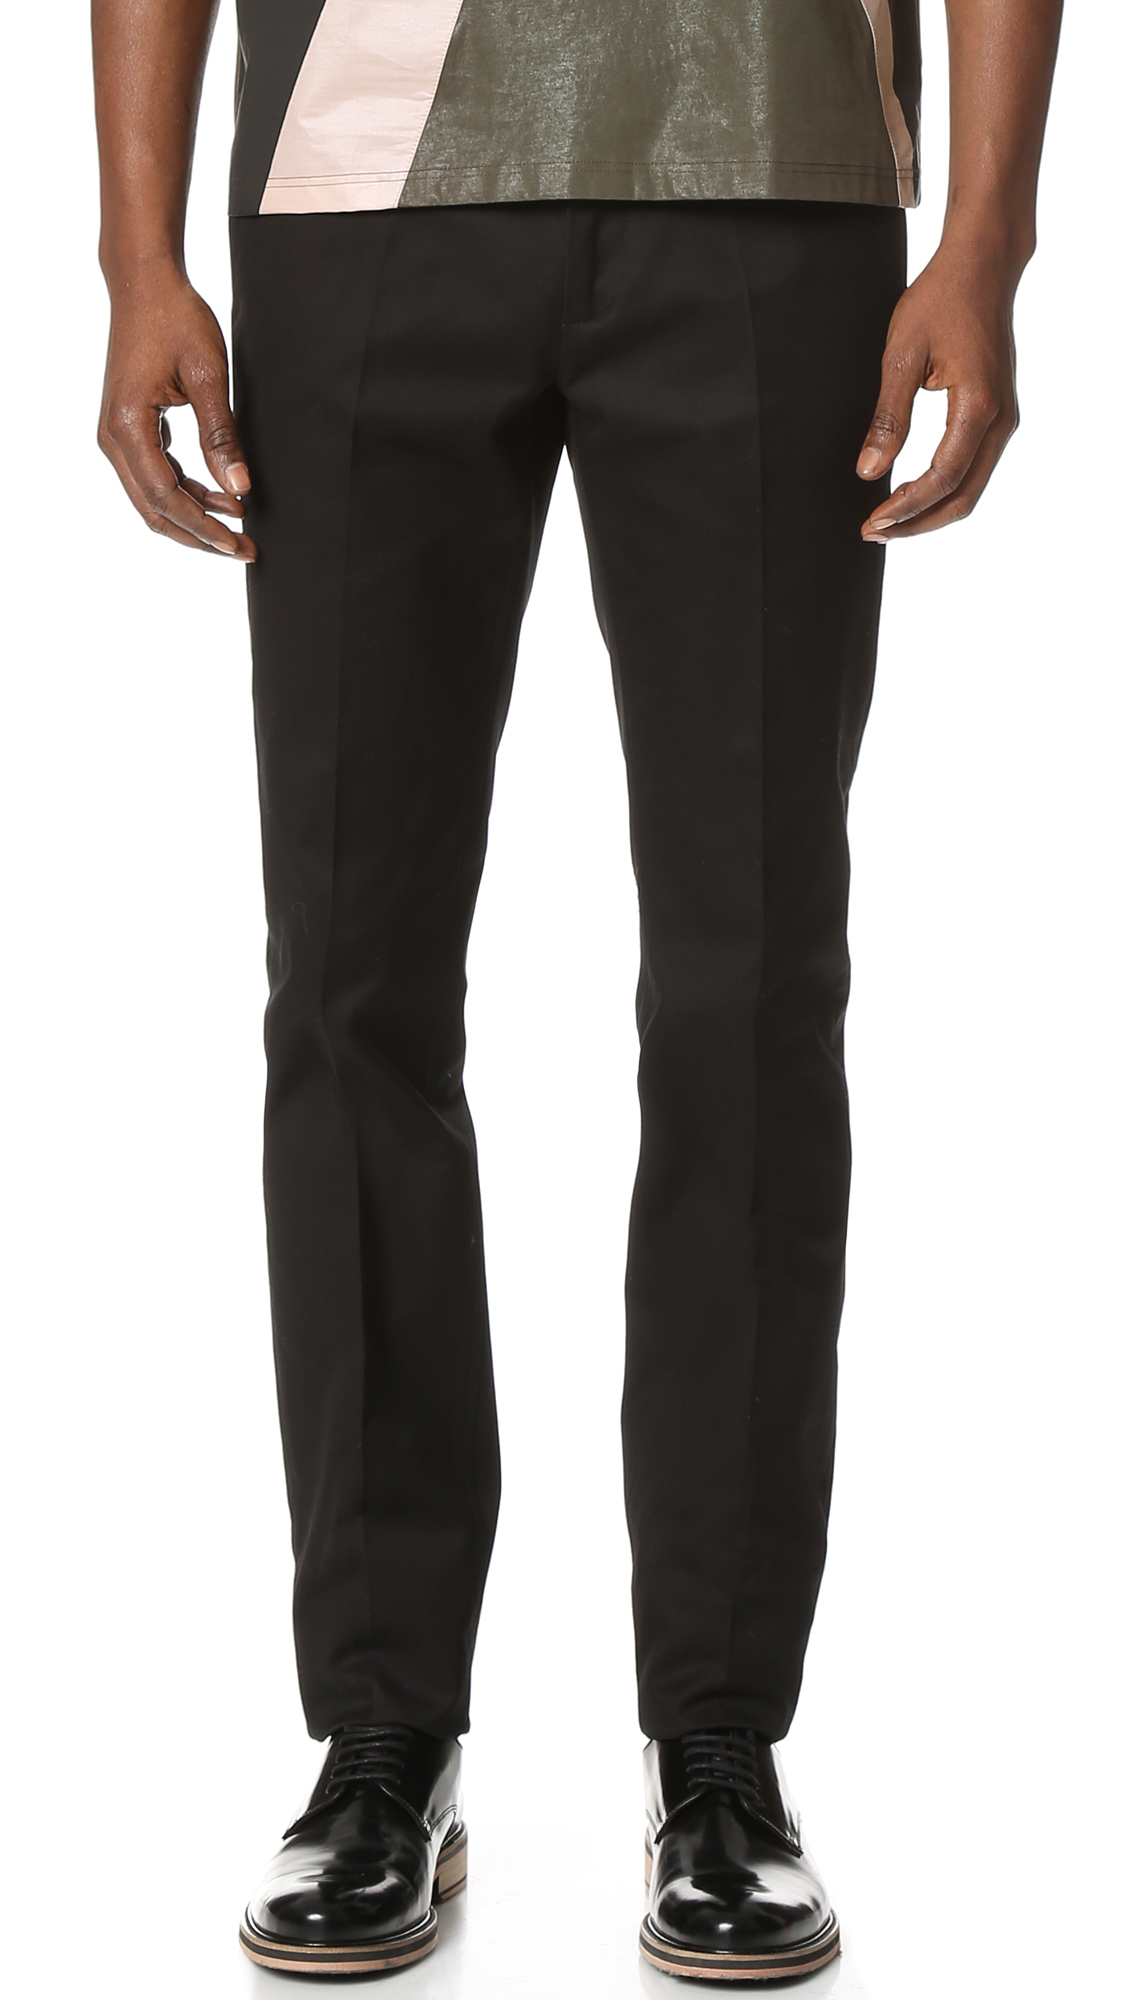 Lyst - Calvin Klein Exact Compact Cotton Twill Slim Fit Pants in Black ...